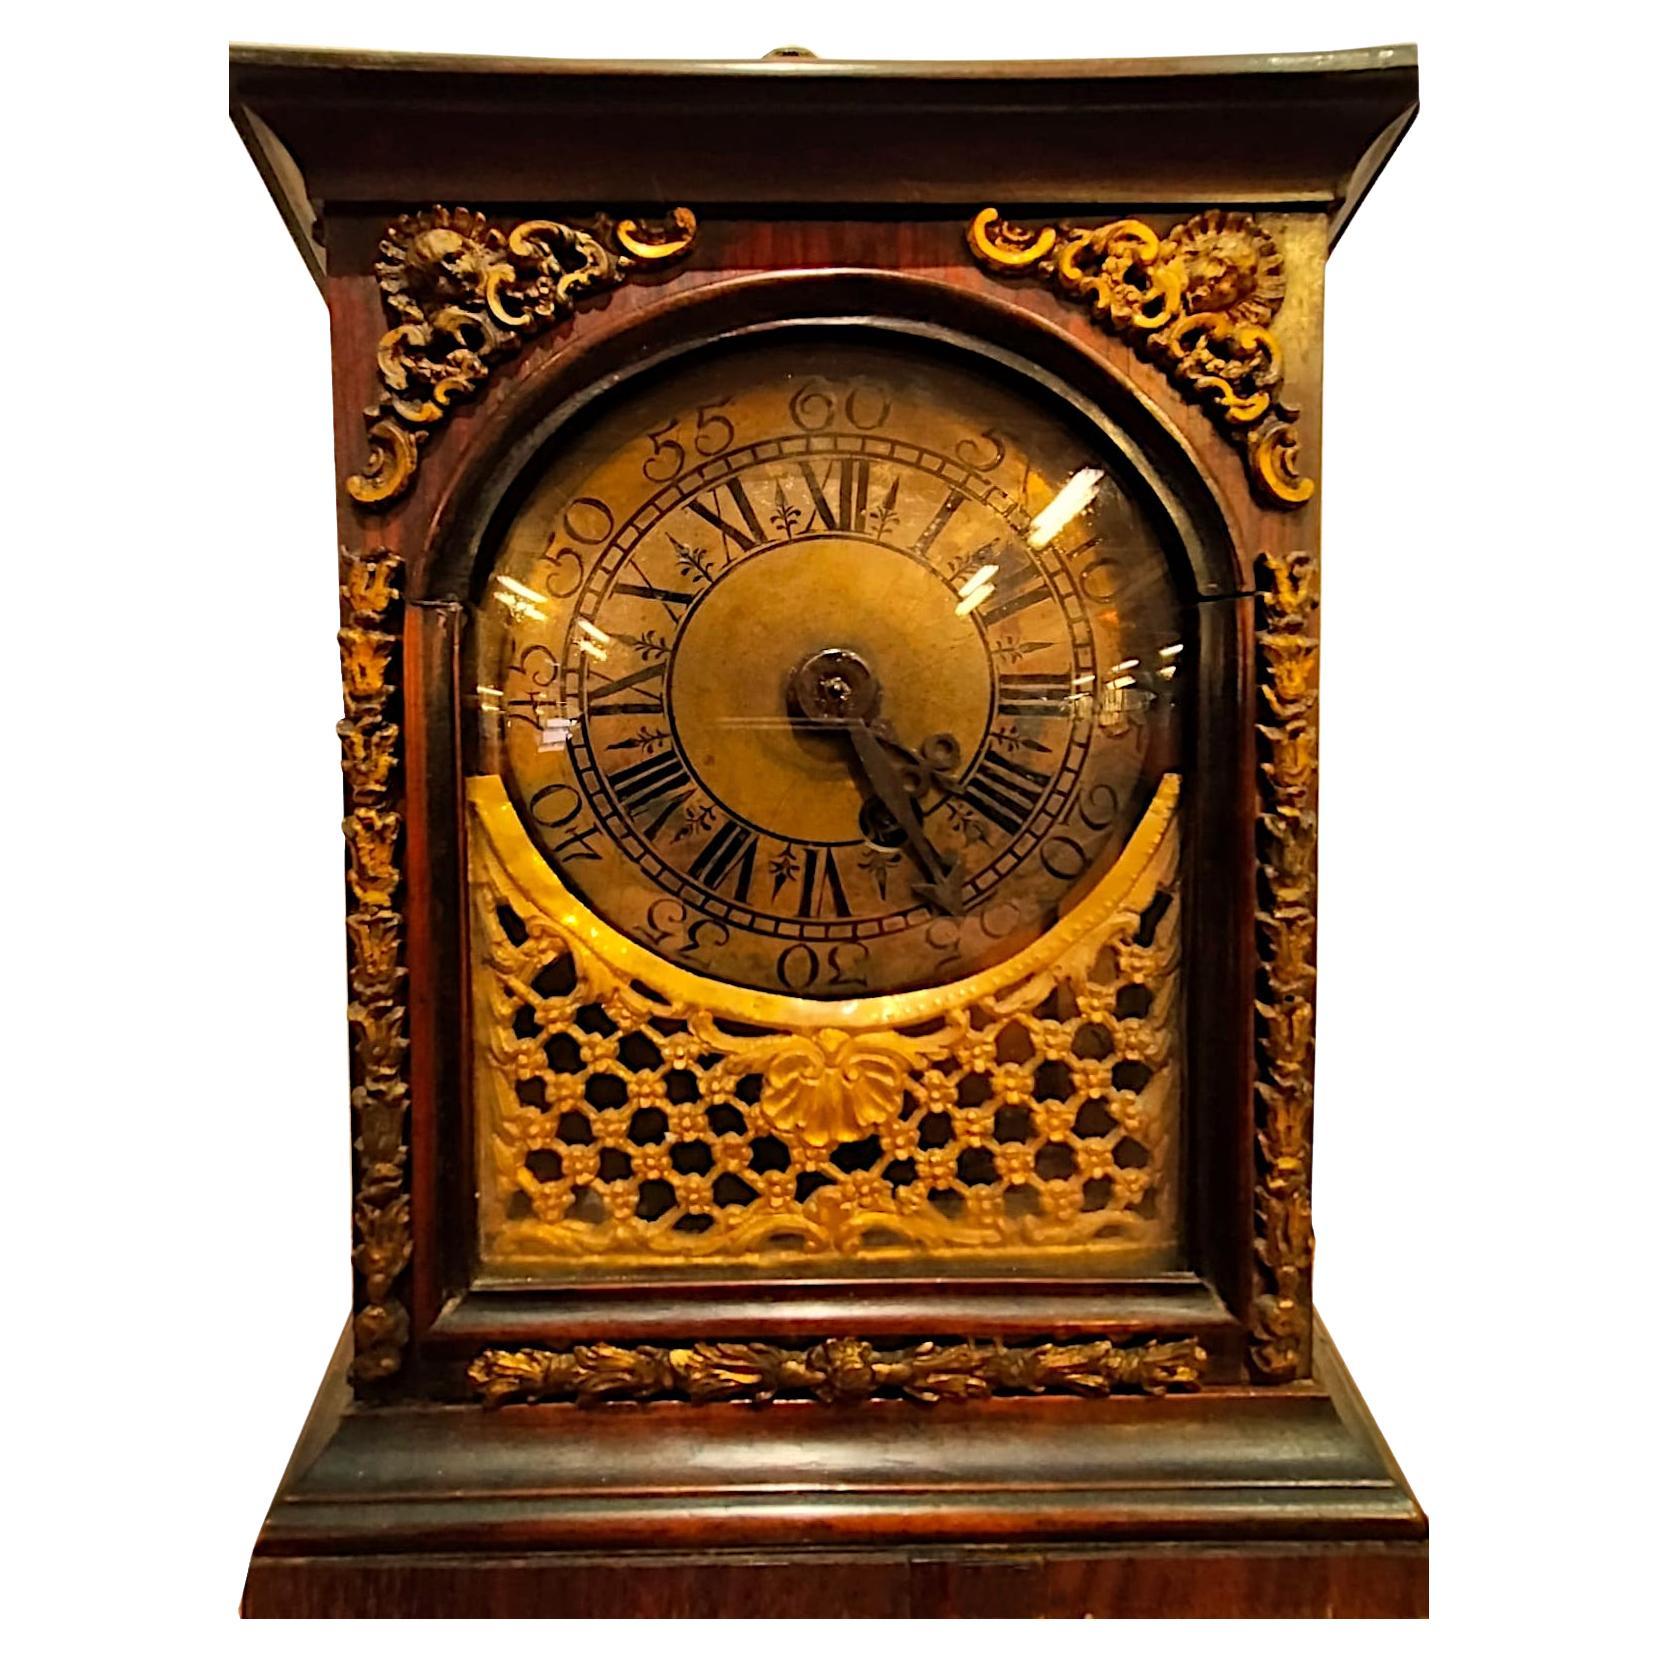 Table clock from the early 1700s,  rosewood and gilded bronzes